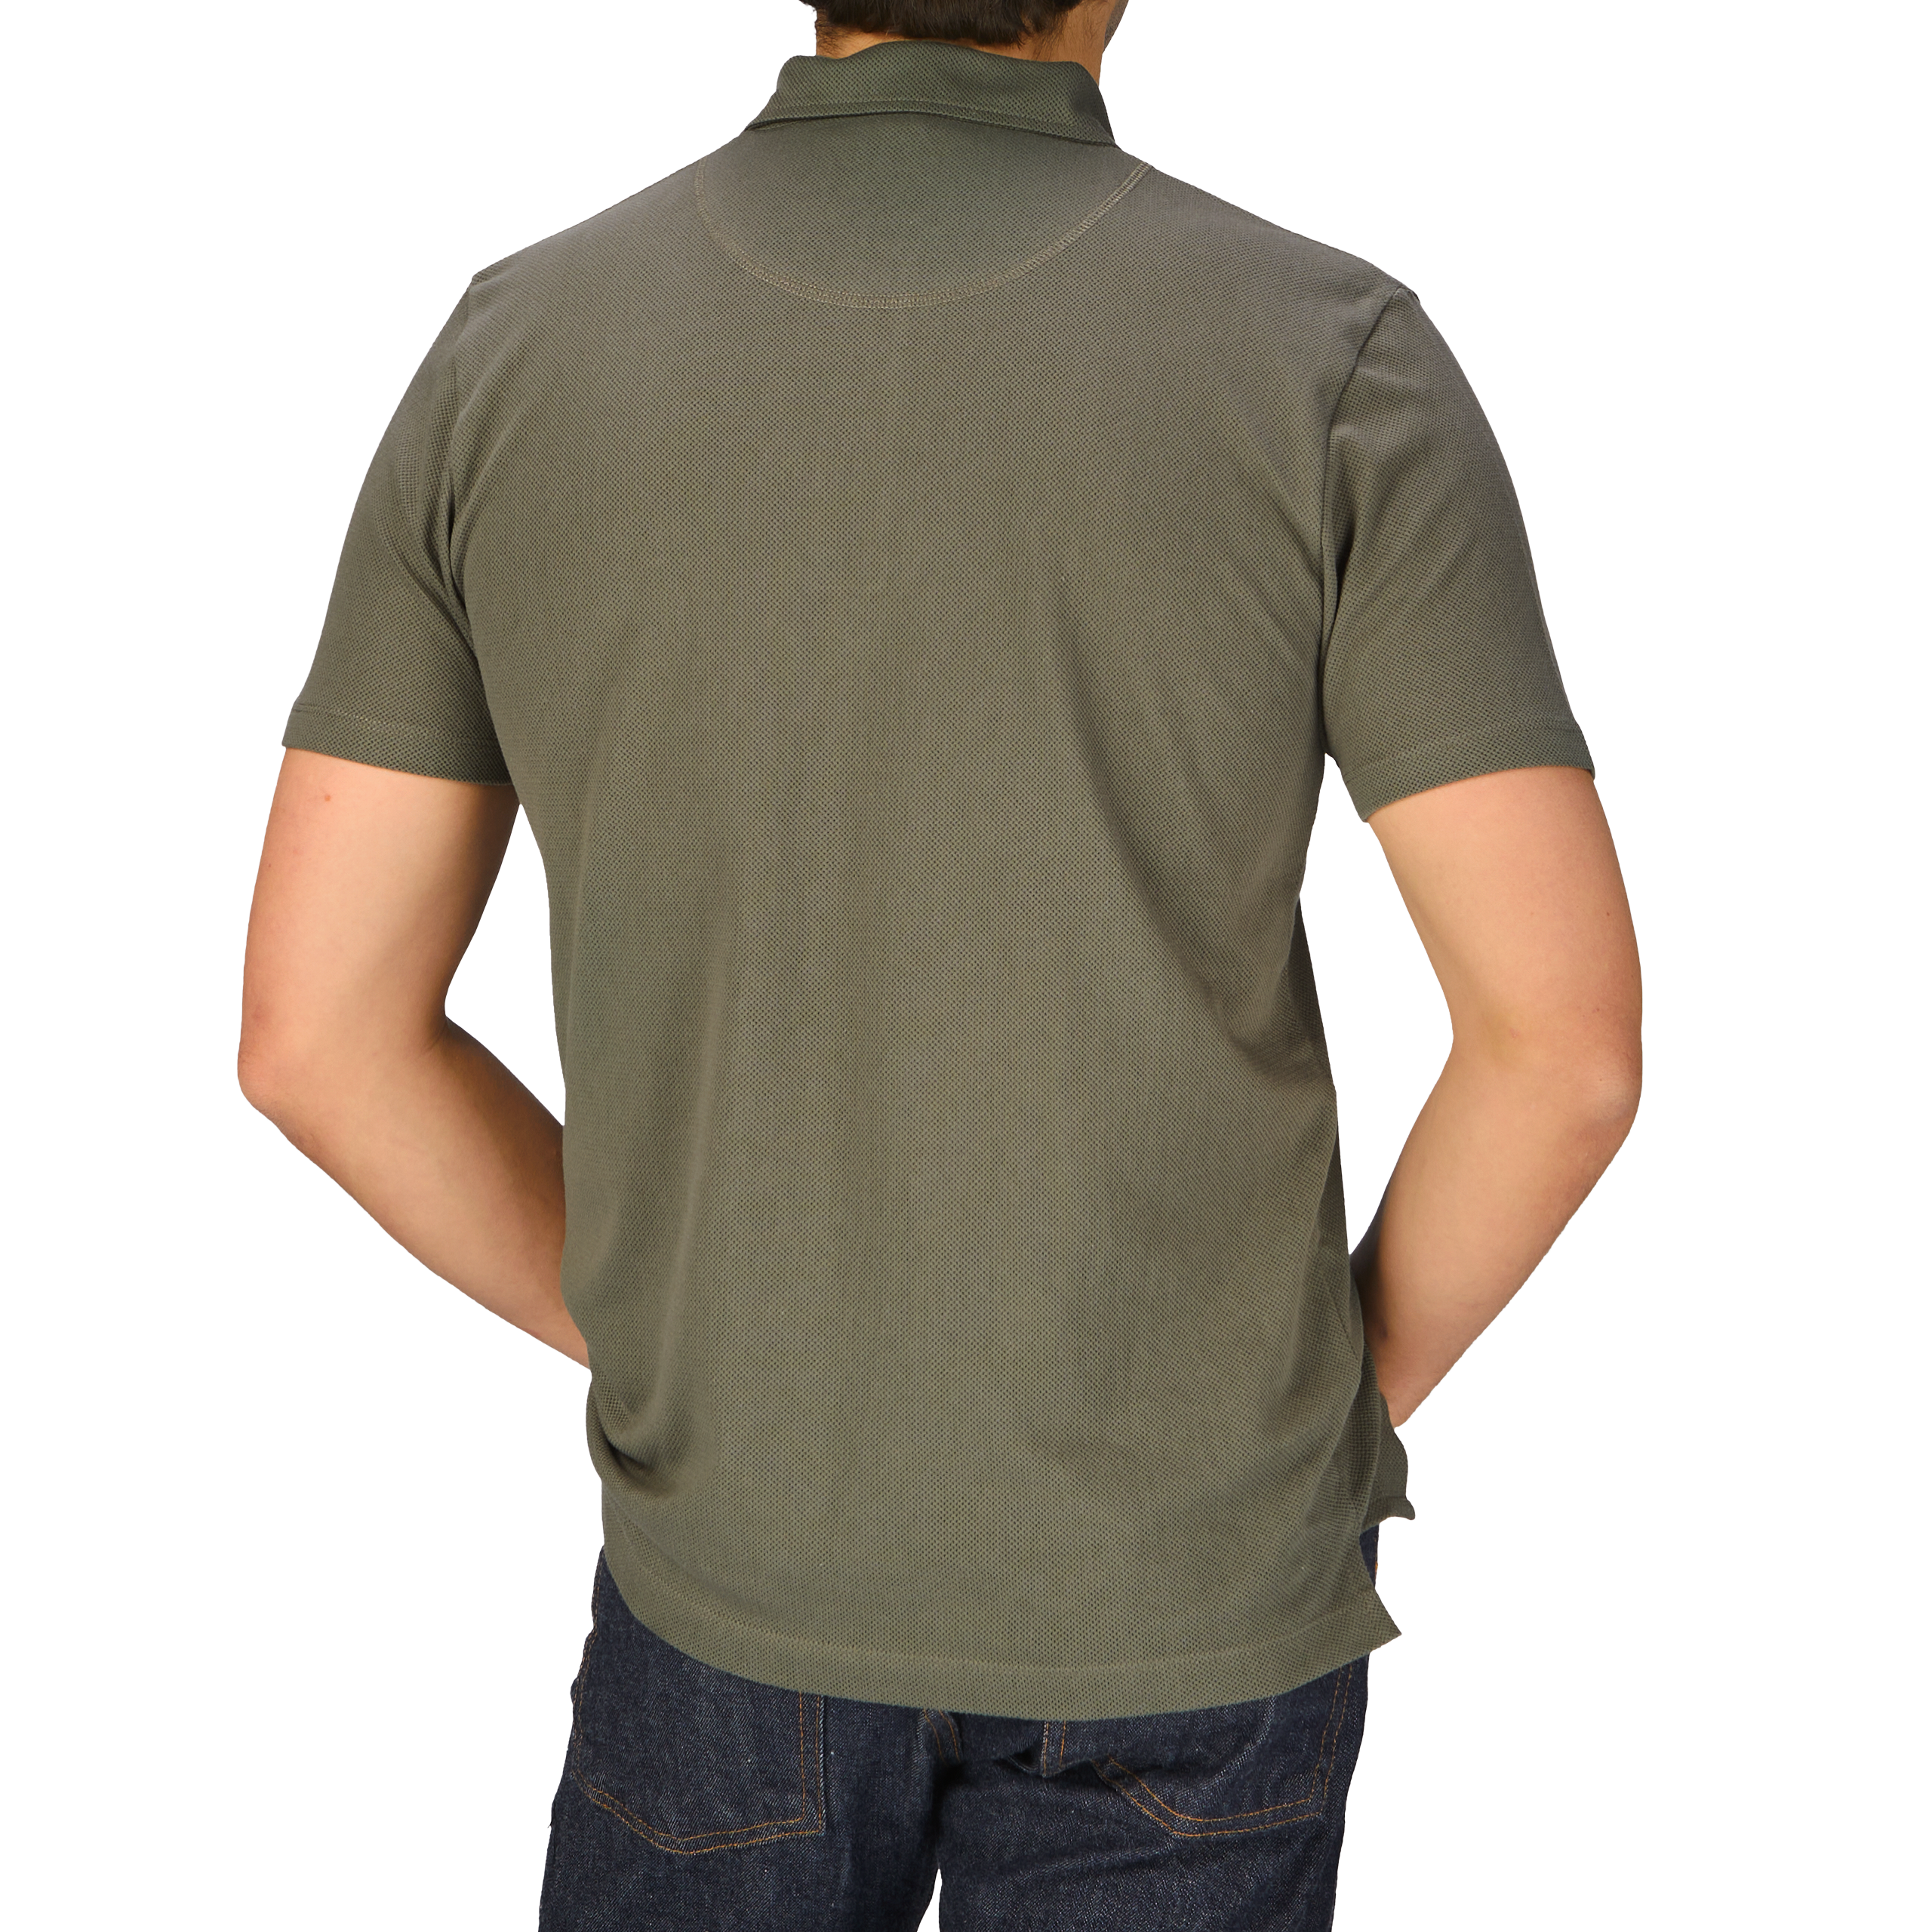 The man is wearing a Khaki Green Cotton Riviera Polo Shirt by Sunspel, resembling James Bond's iconic style.